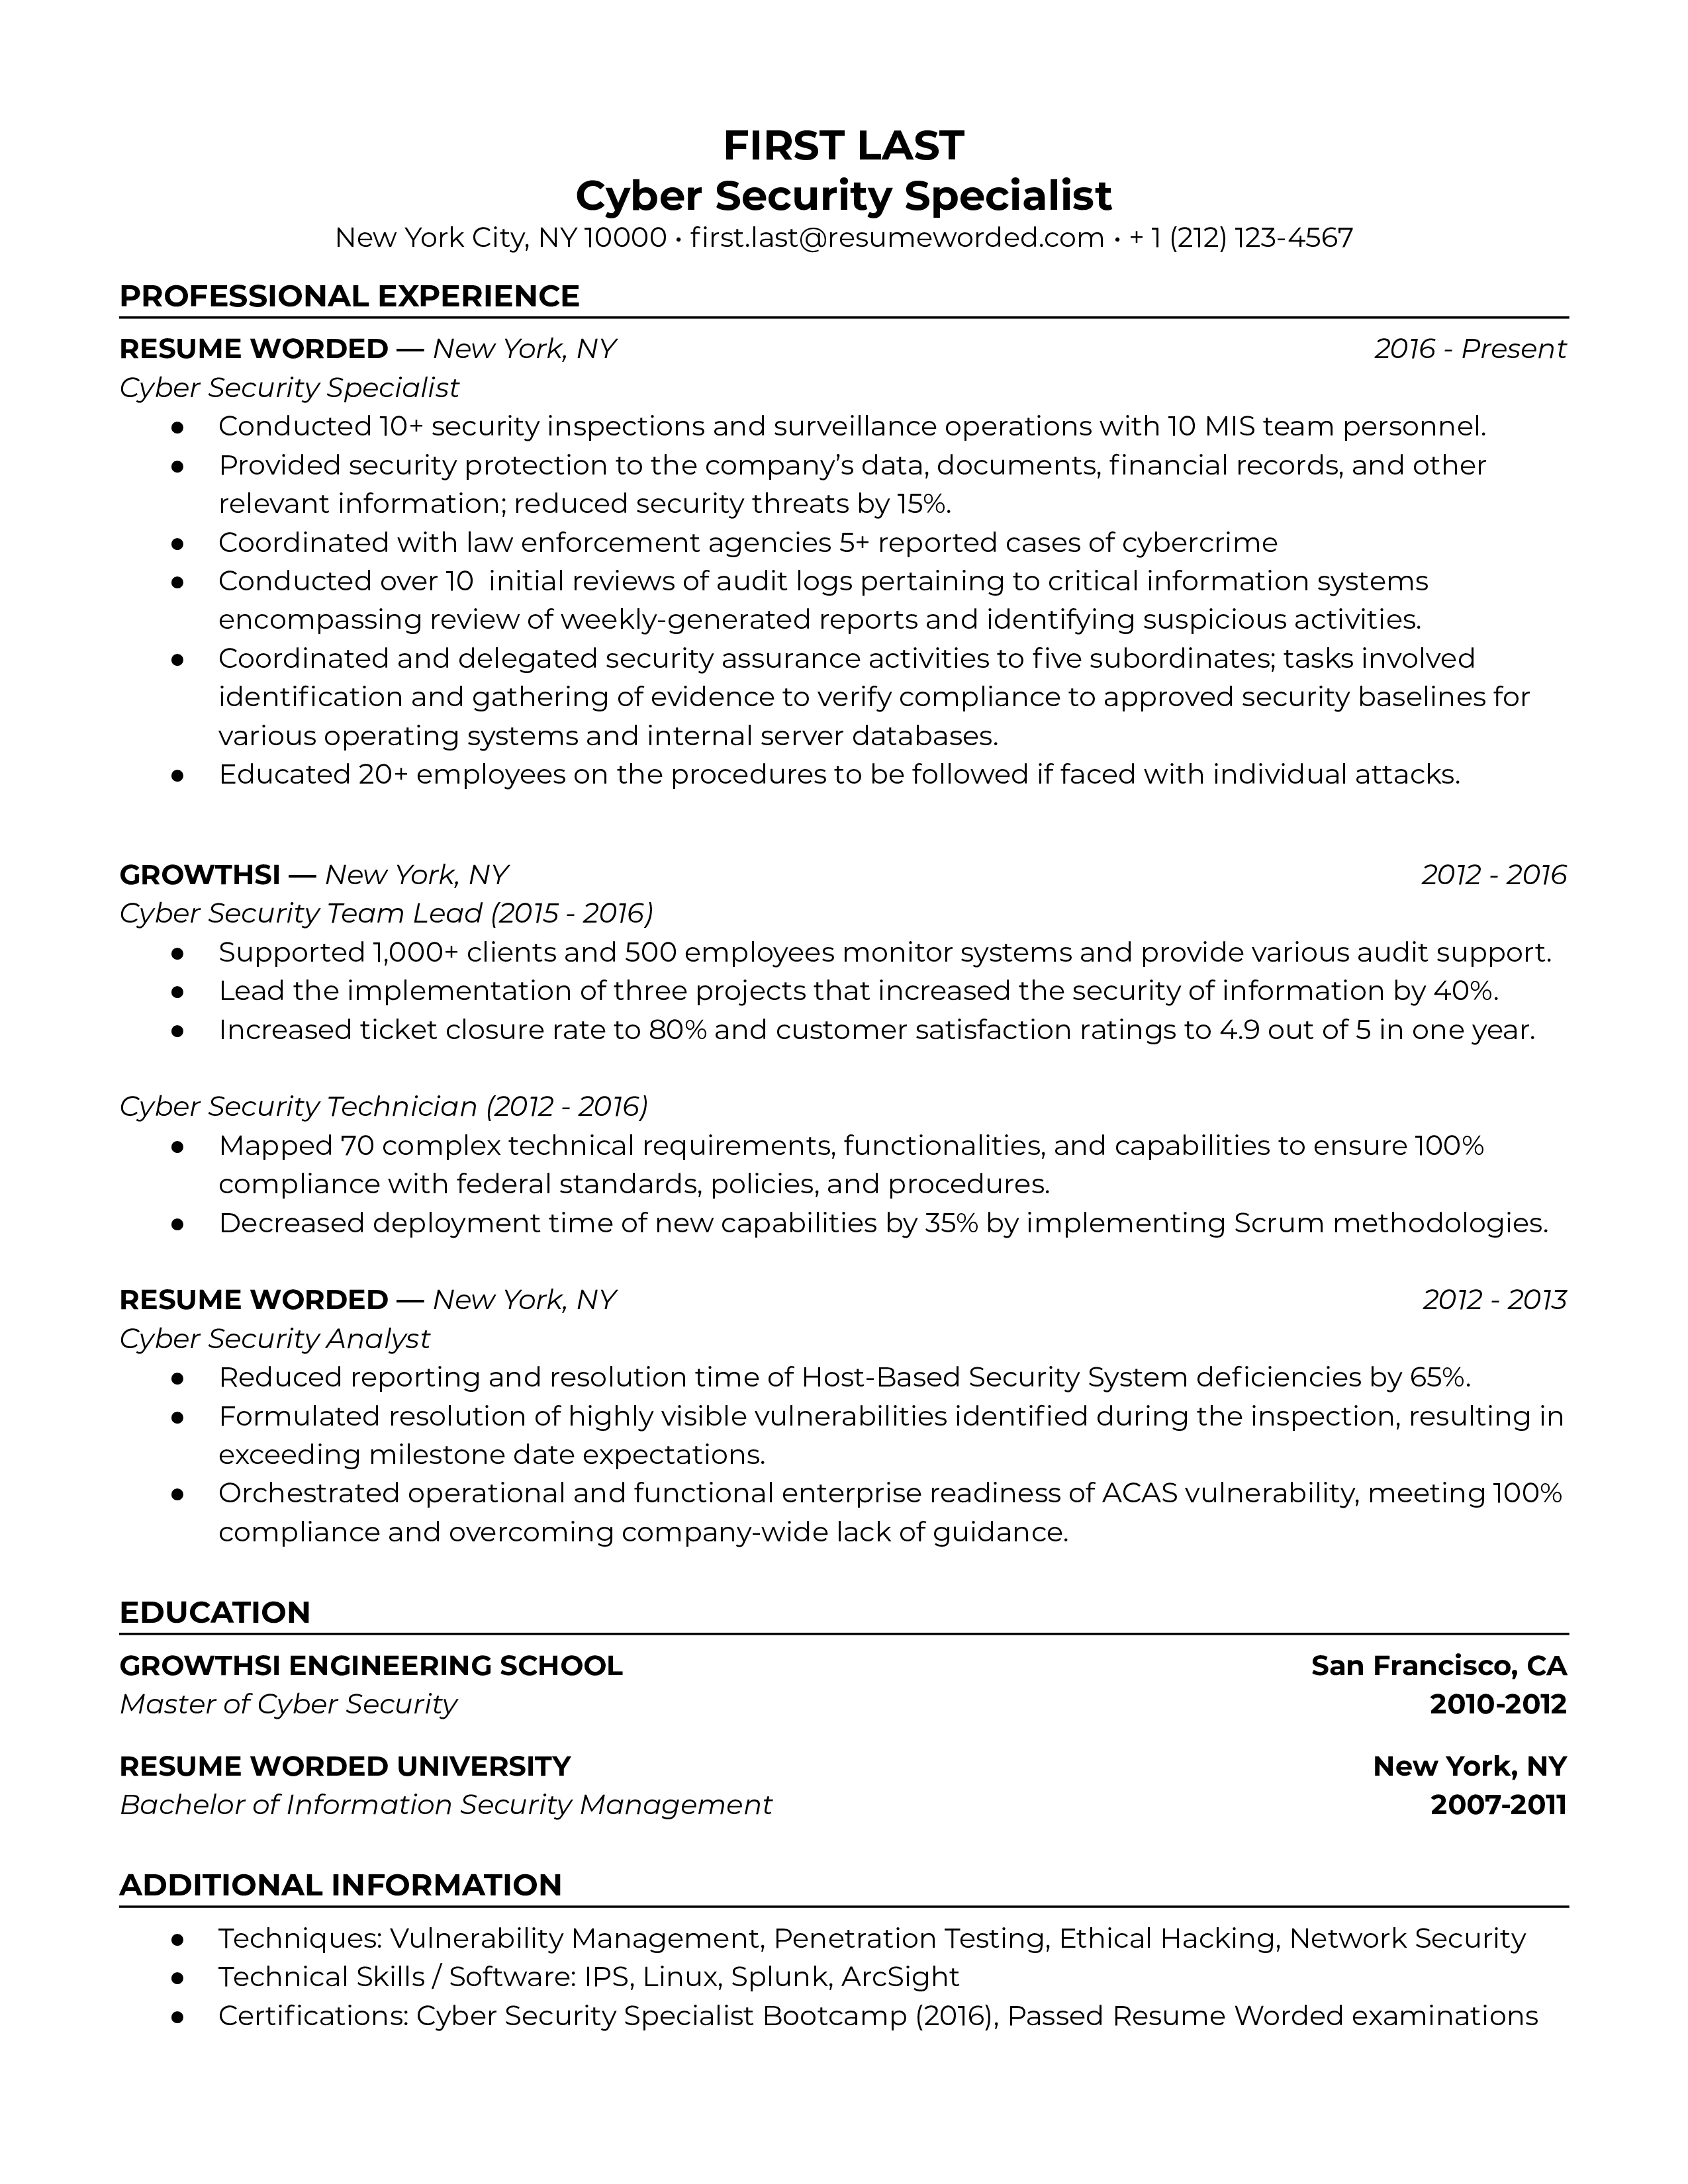 Cyber Security Specialist Resume Template + Example